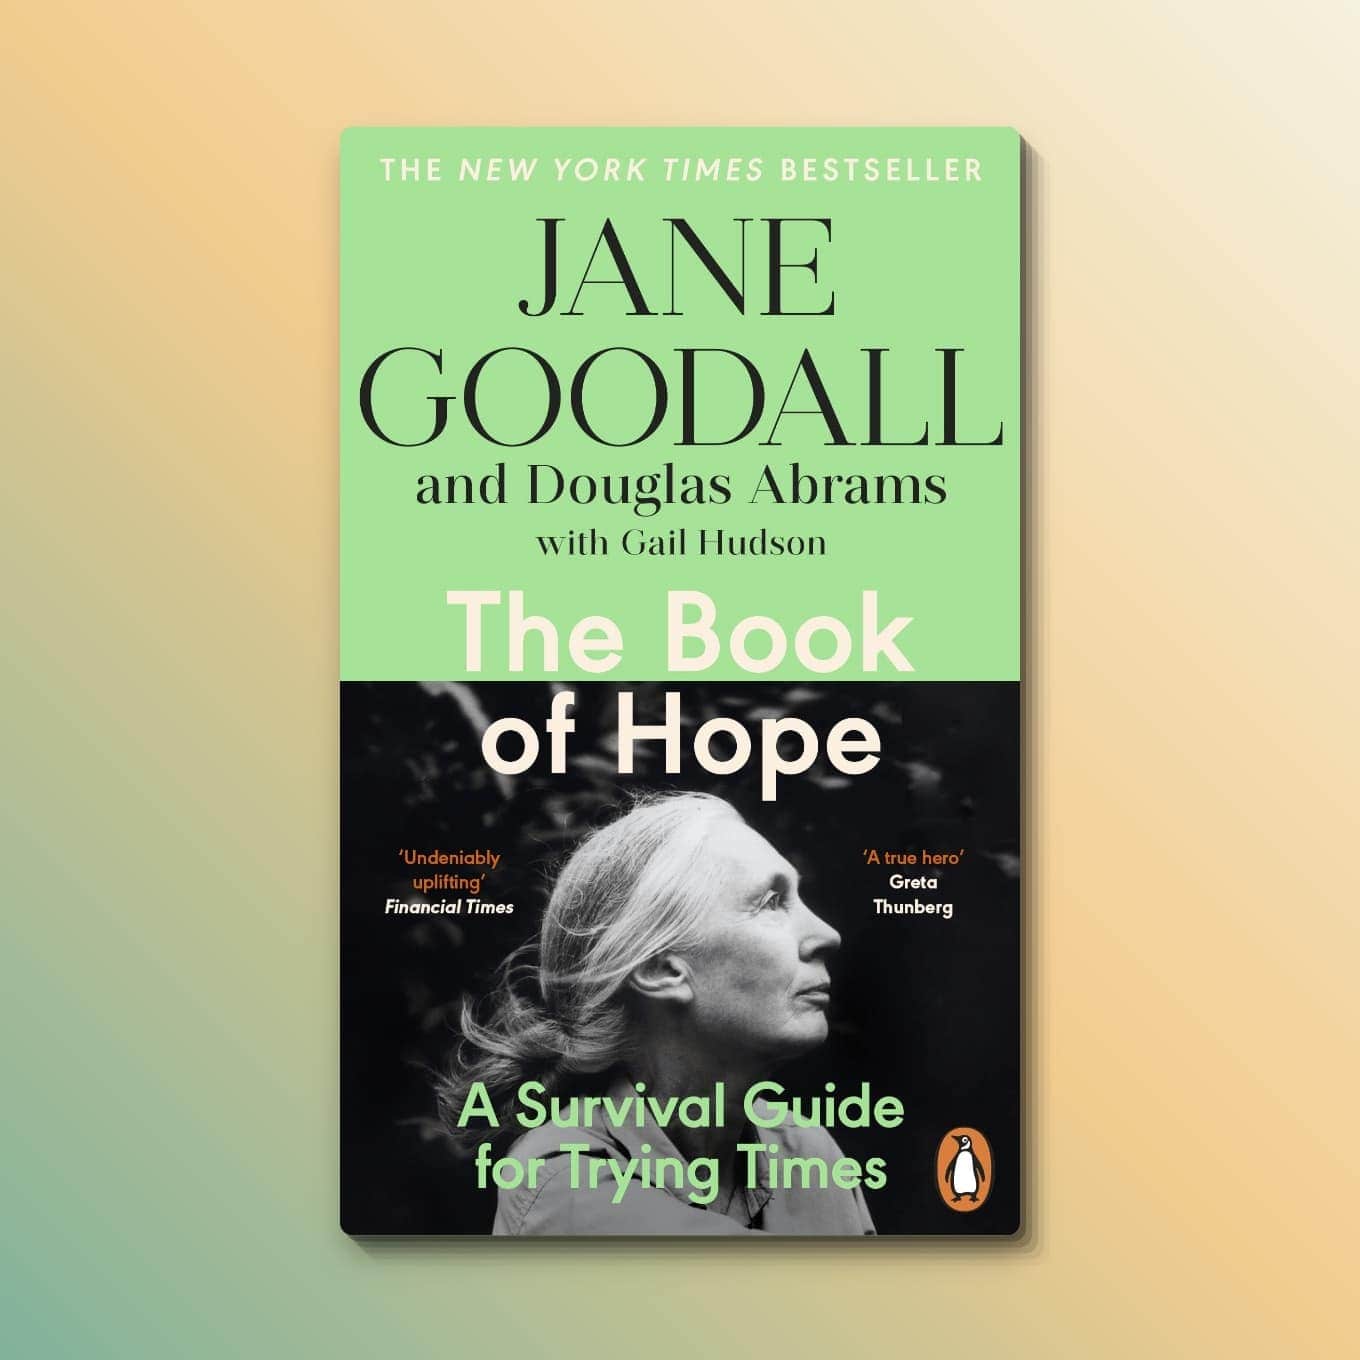 “The Book of Hope: A Survival Guide for Trying Times” by Douglas Abrams and Jane Goodall